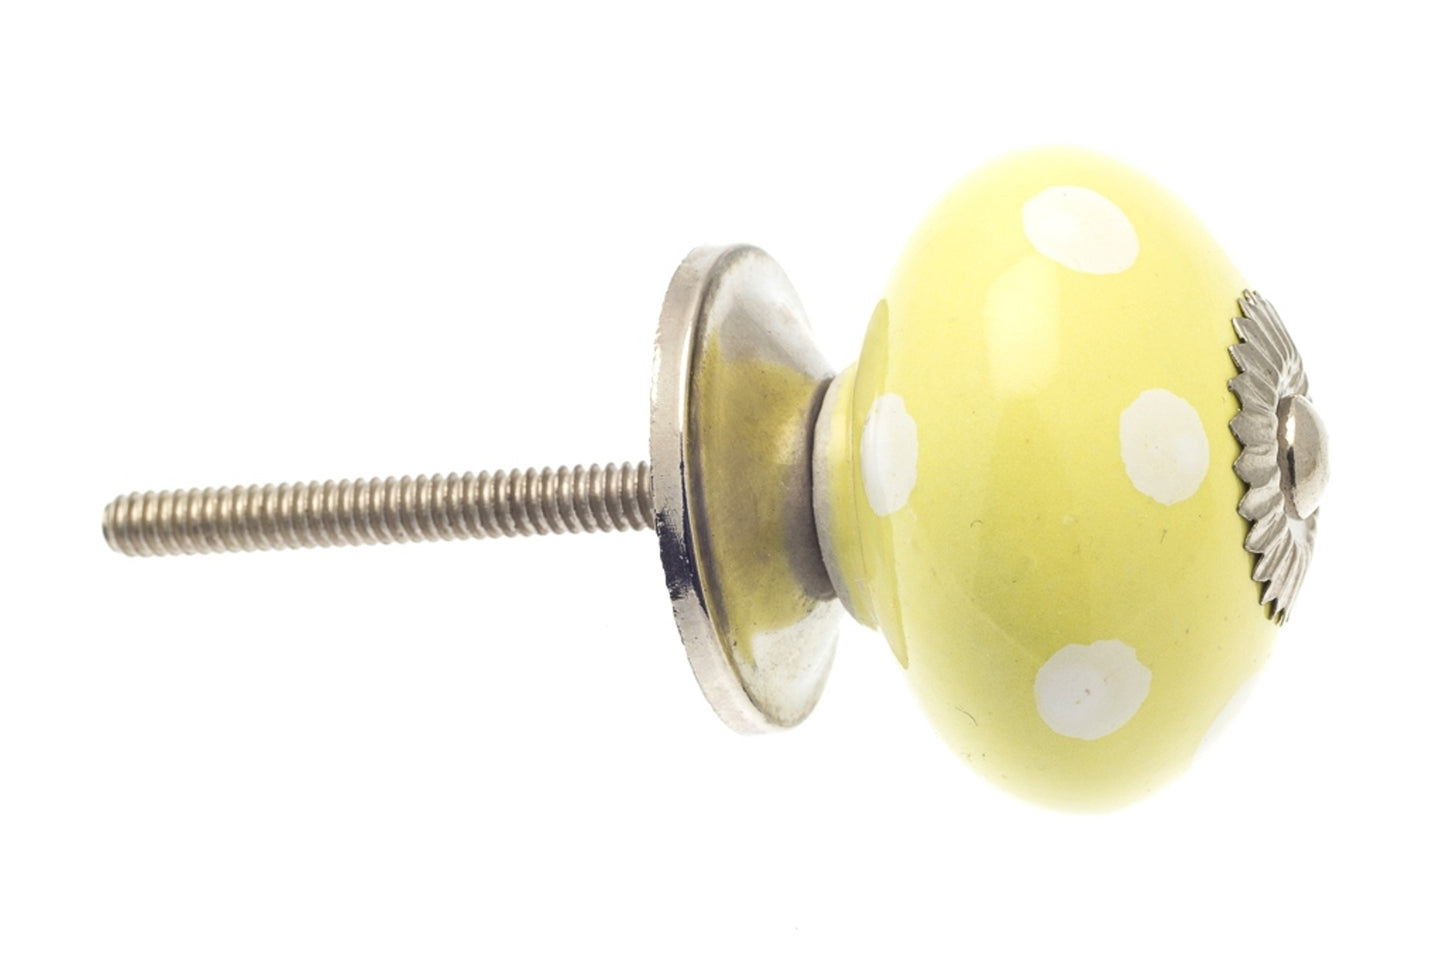 Ceramic Door Knobs Yellow with White Spots